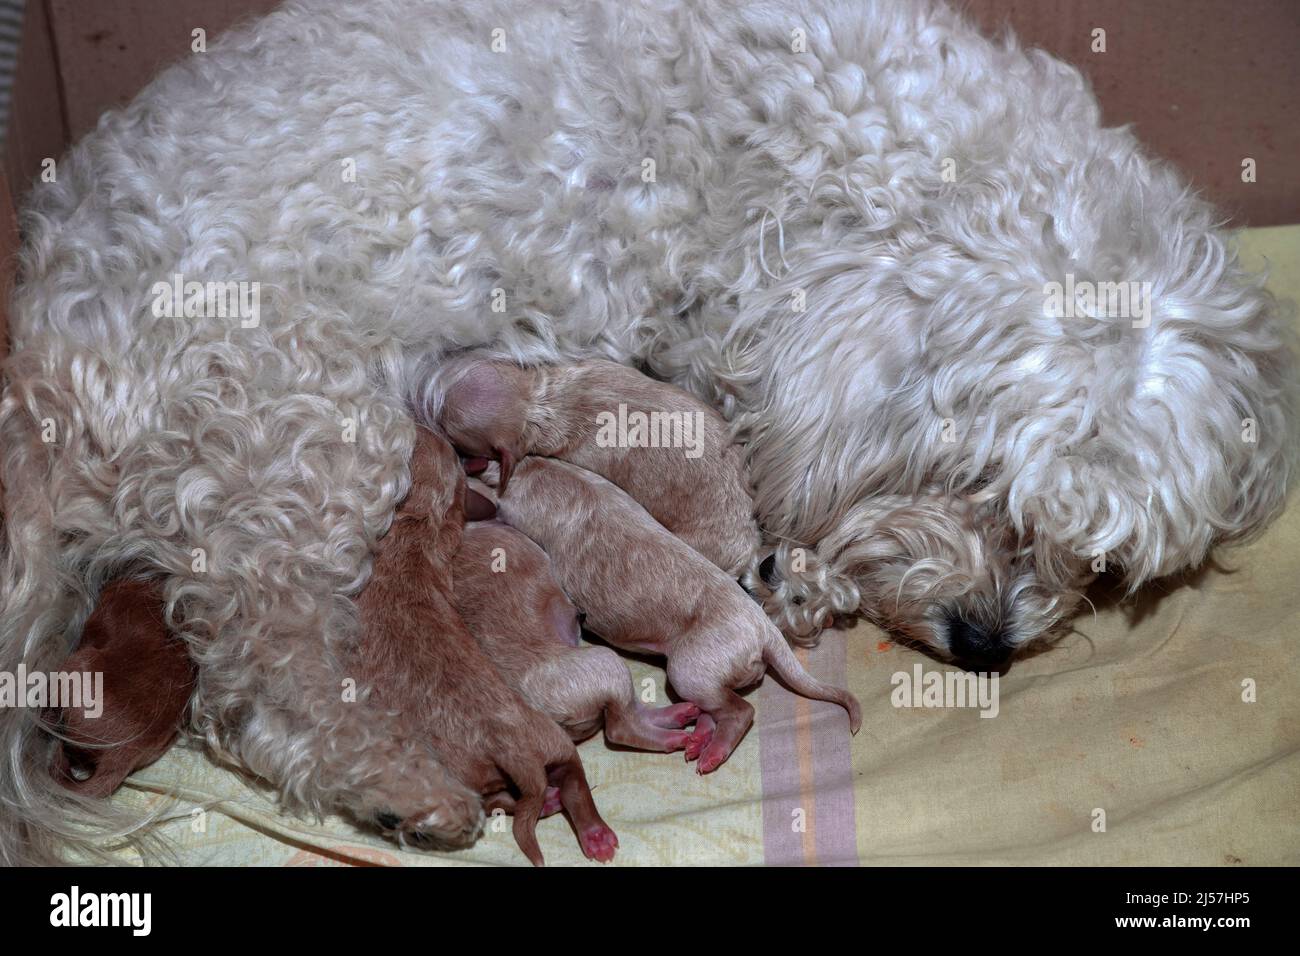 Bichon mother breastfeeds a day old Poochon (Poodle & Bichon mix) puppies in a whelping box Stock Photo